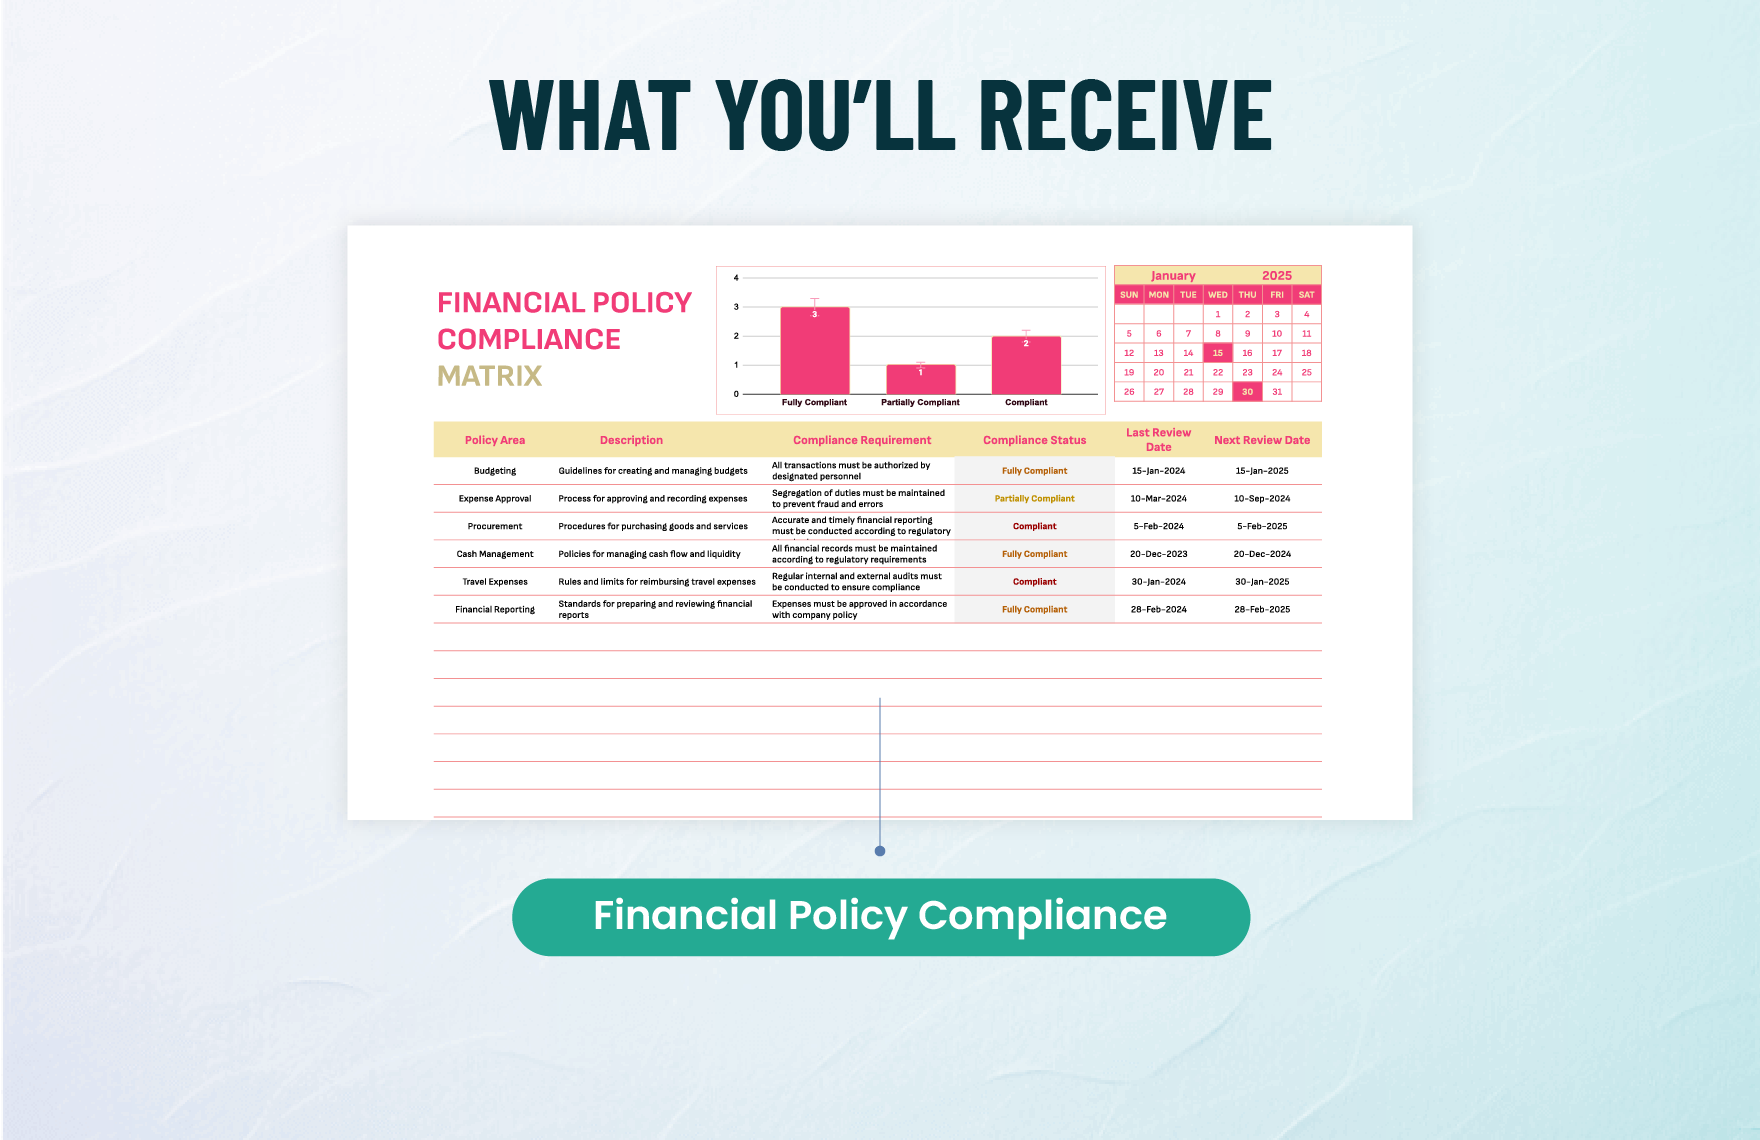 Financial Policy Compliance Matrix Template